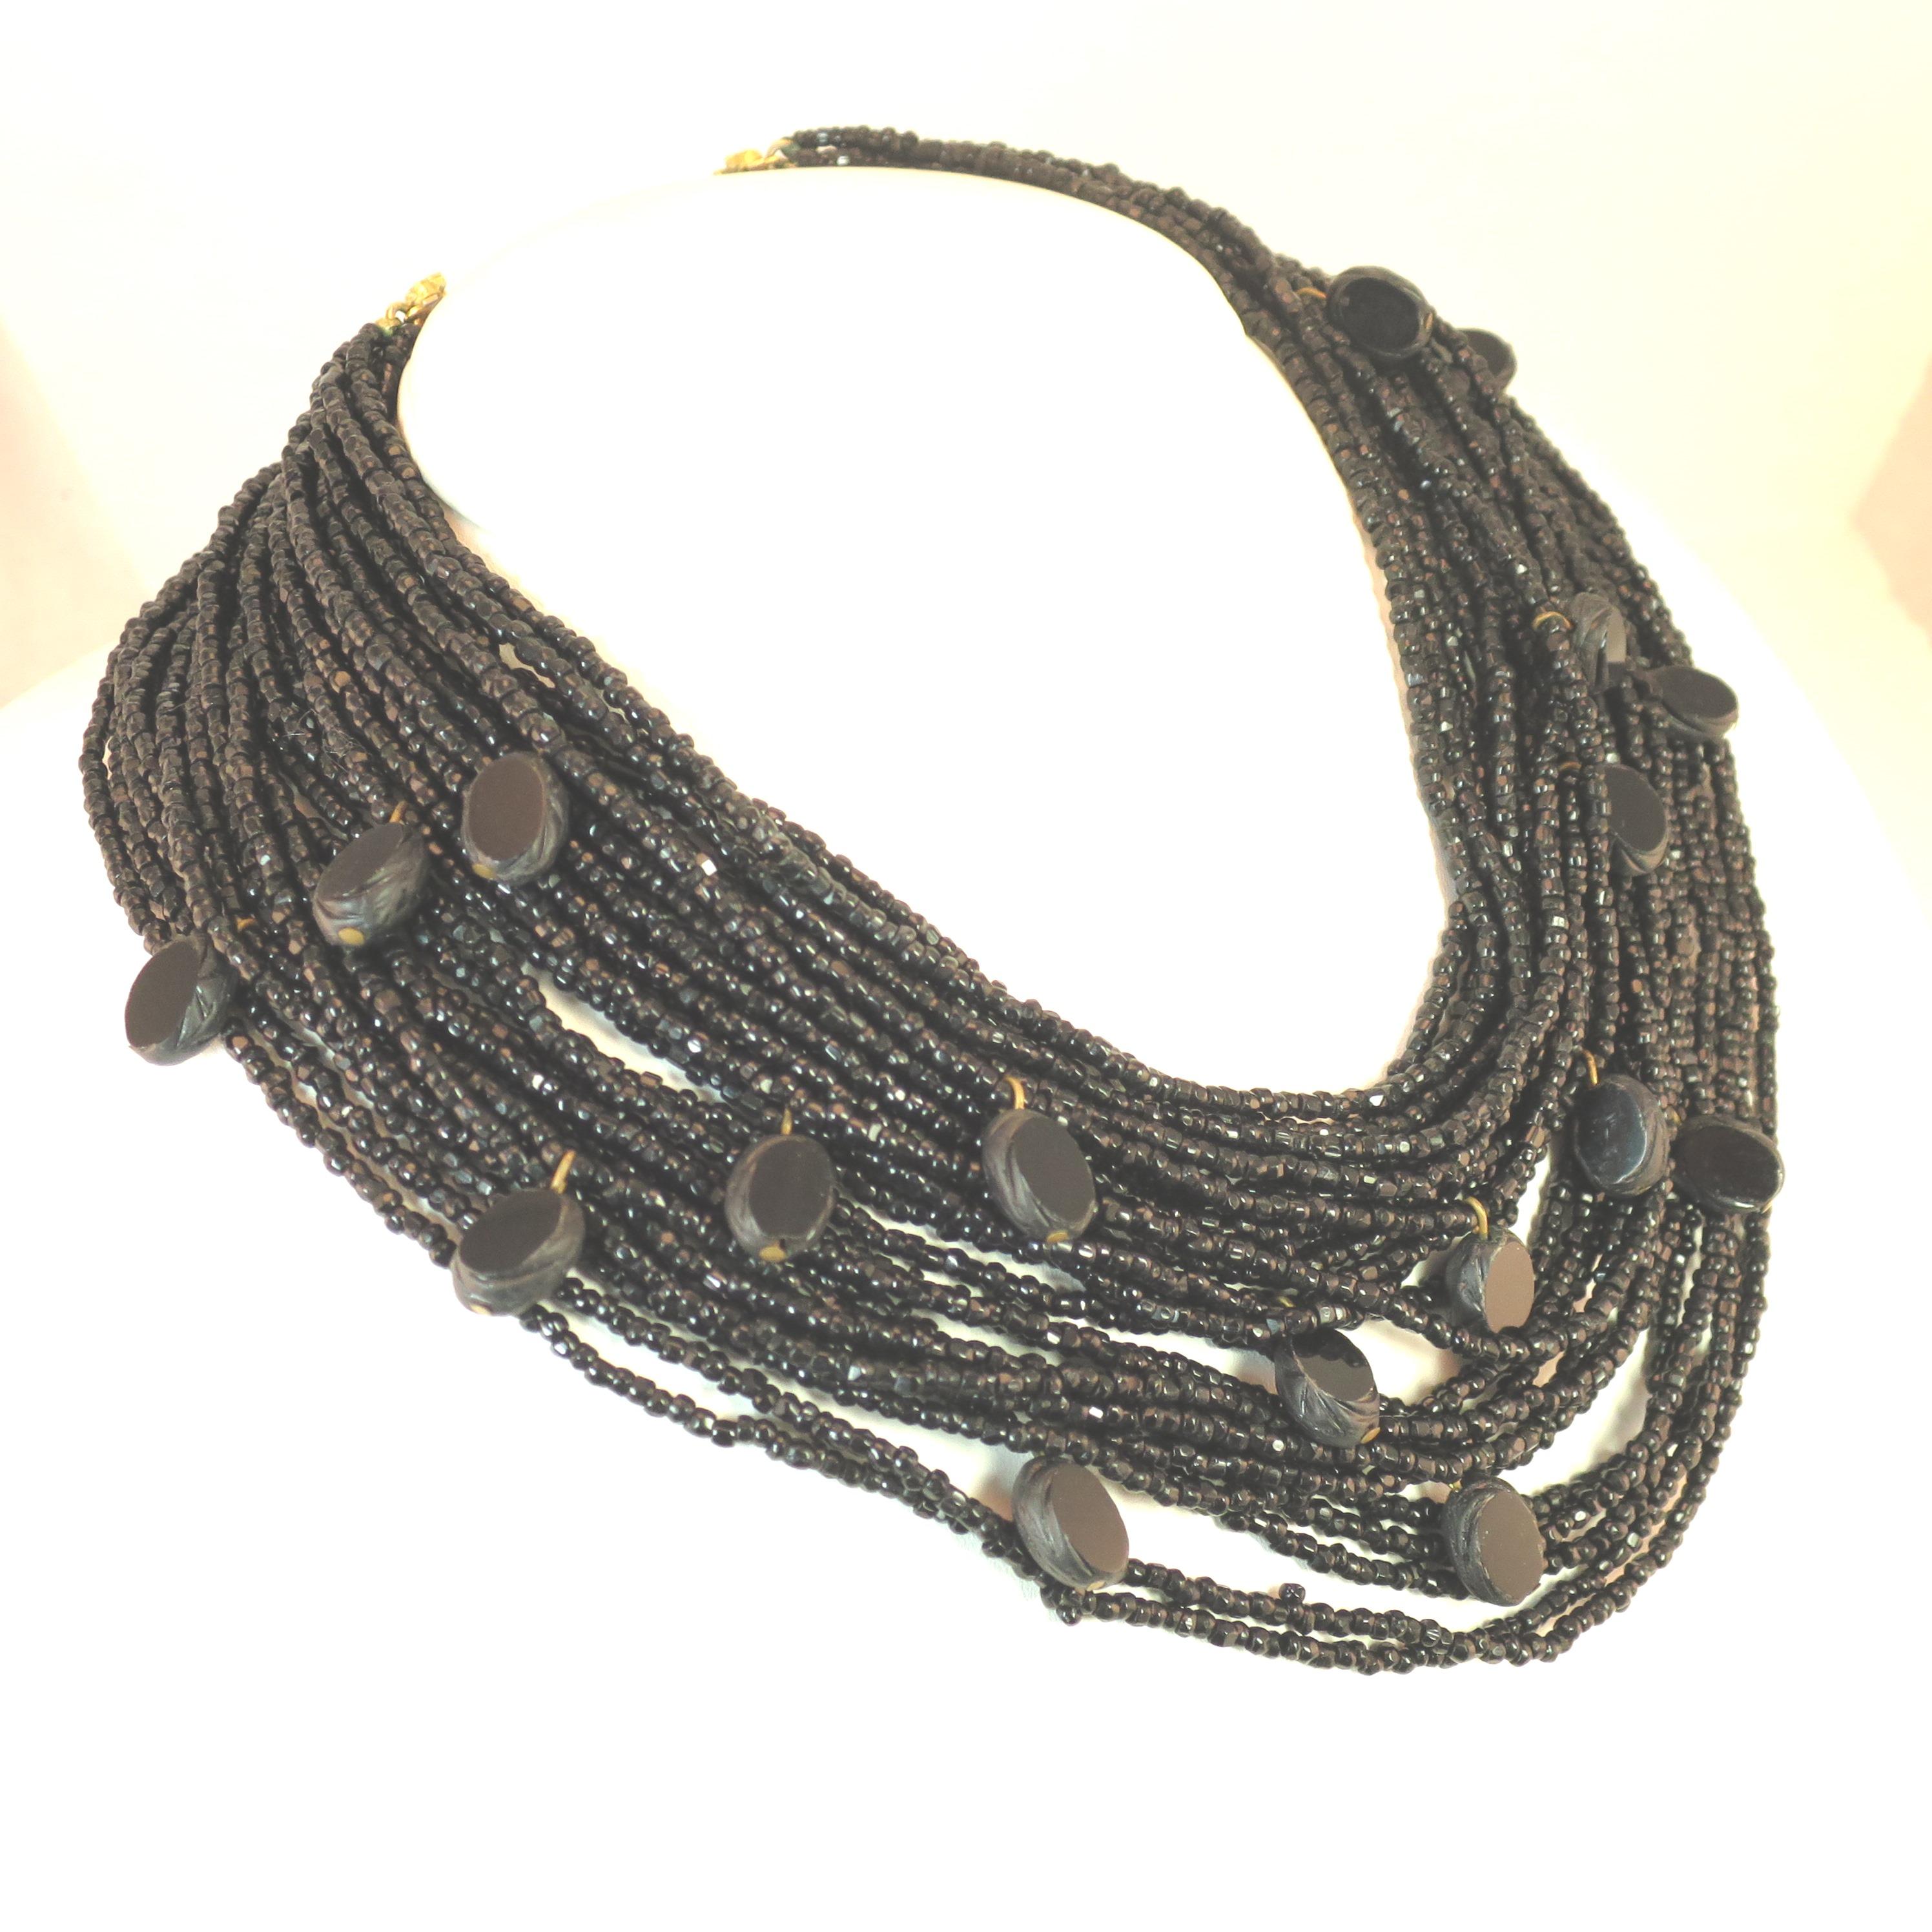 Offered here is a Mid-Century Sandor draping multi-strand beaded necklace and matching clip-back earrings of French jet glass from the 1940s. A profusion (27 to be exact) of graduated strands of tiny black french jet glass seed beads are embellished